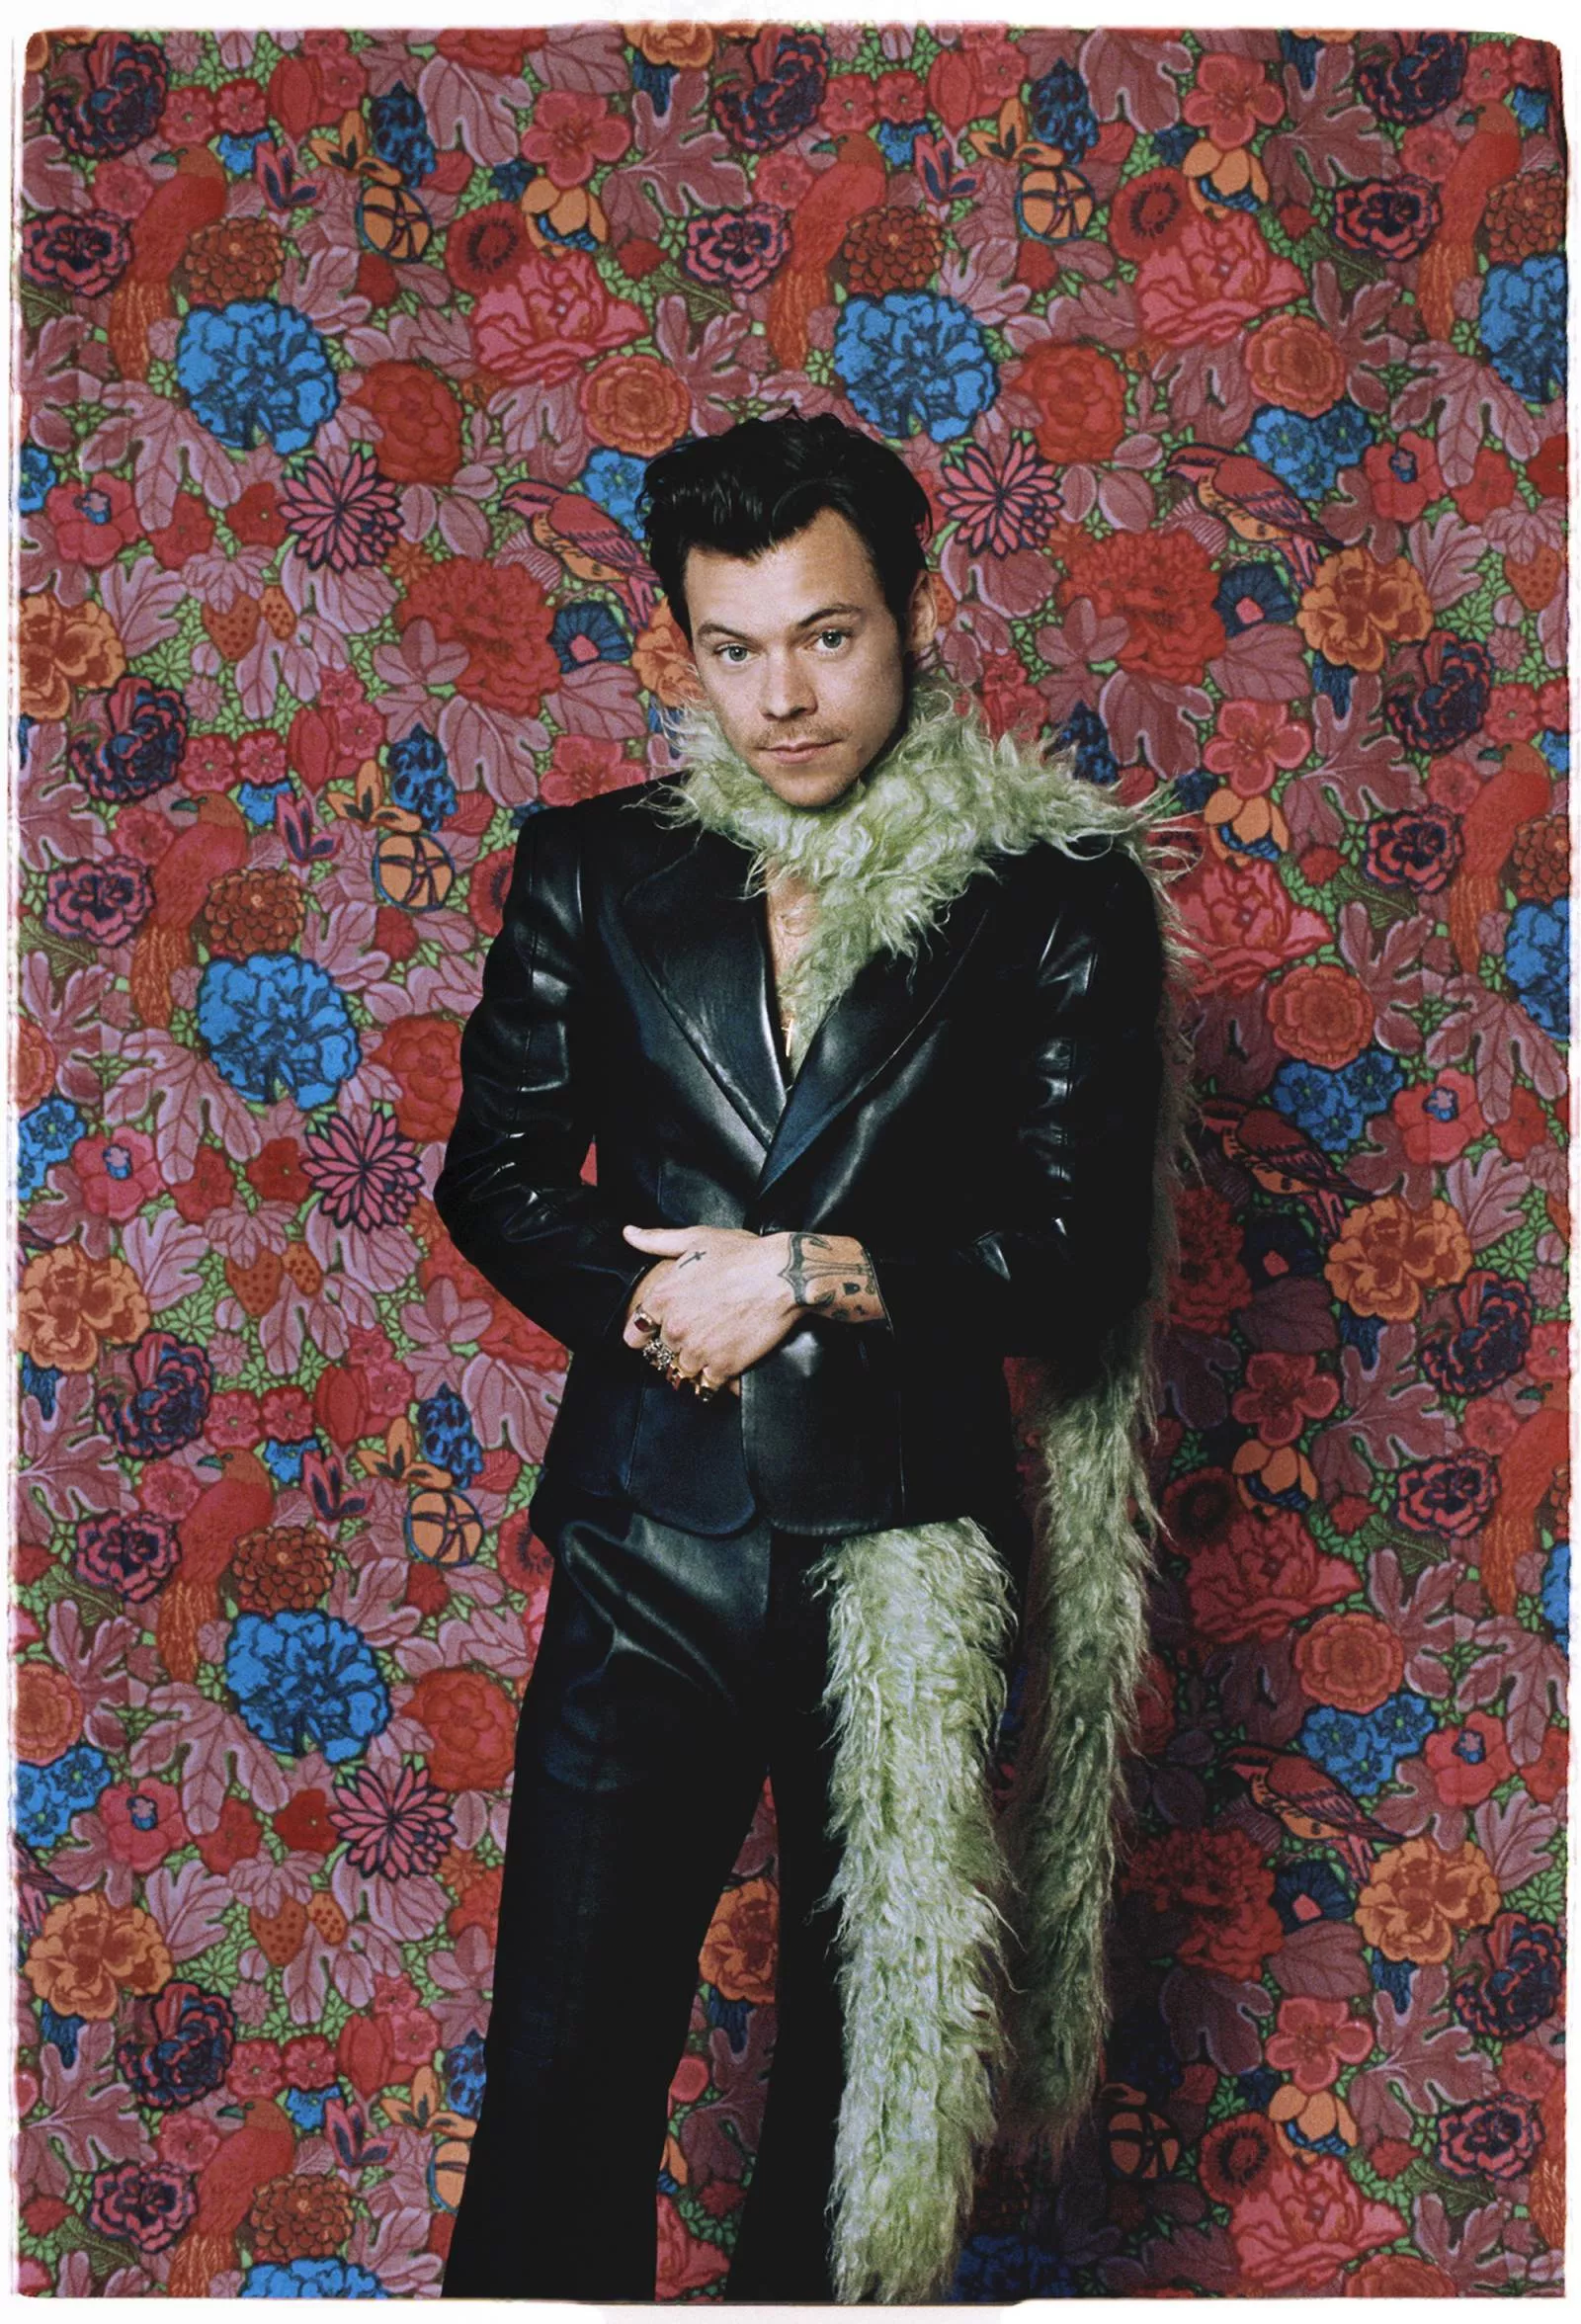 Harry Styles / Getty Images